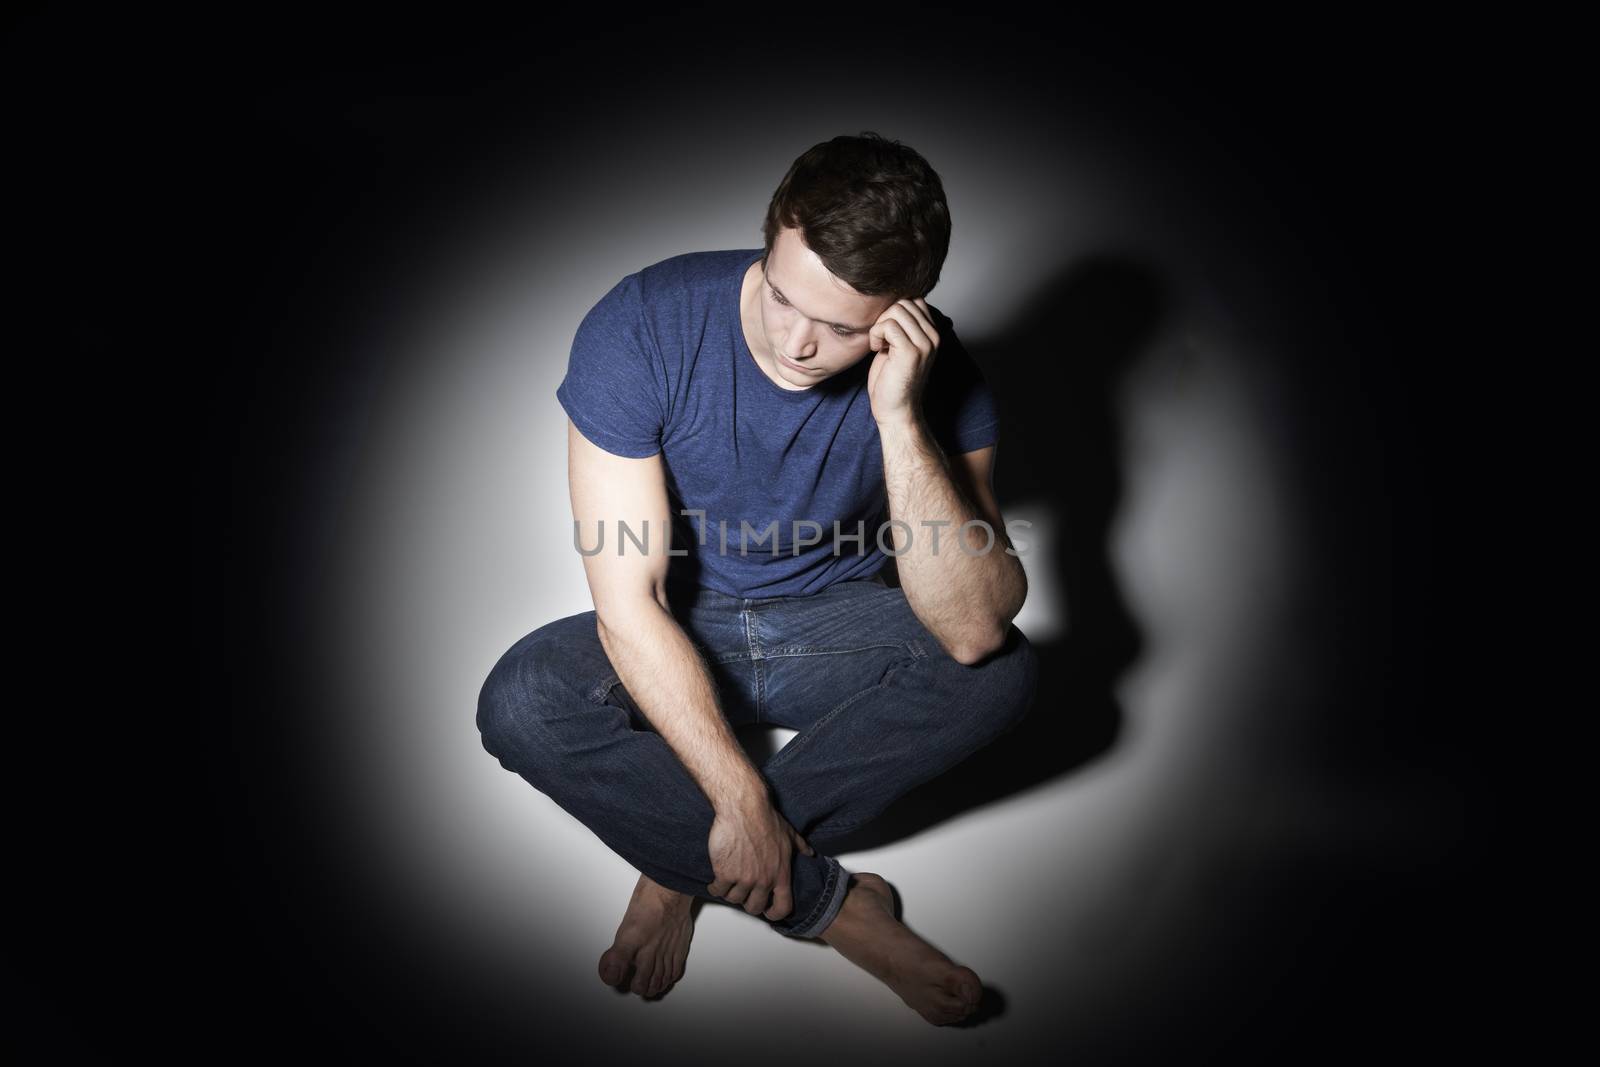 Unhappy Young Man Sitting In Pool Of Light